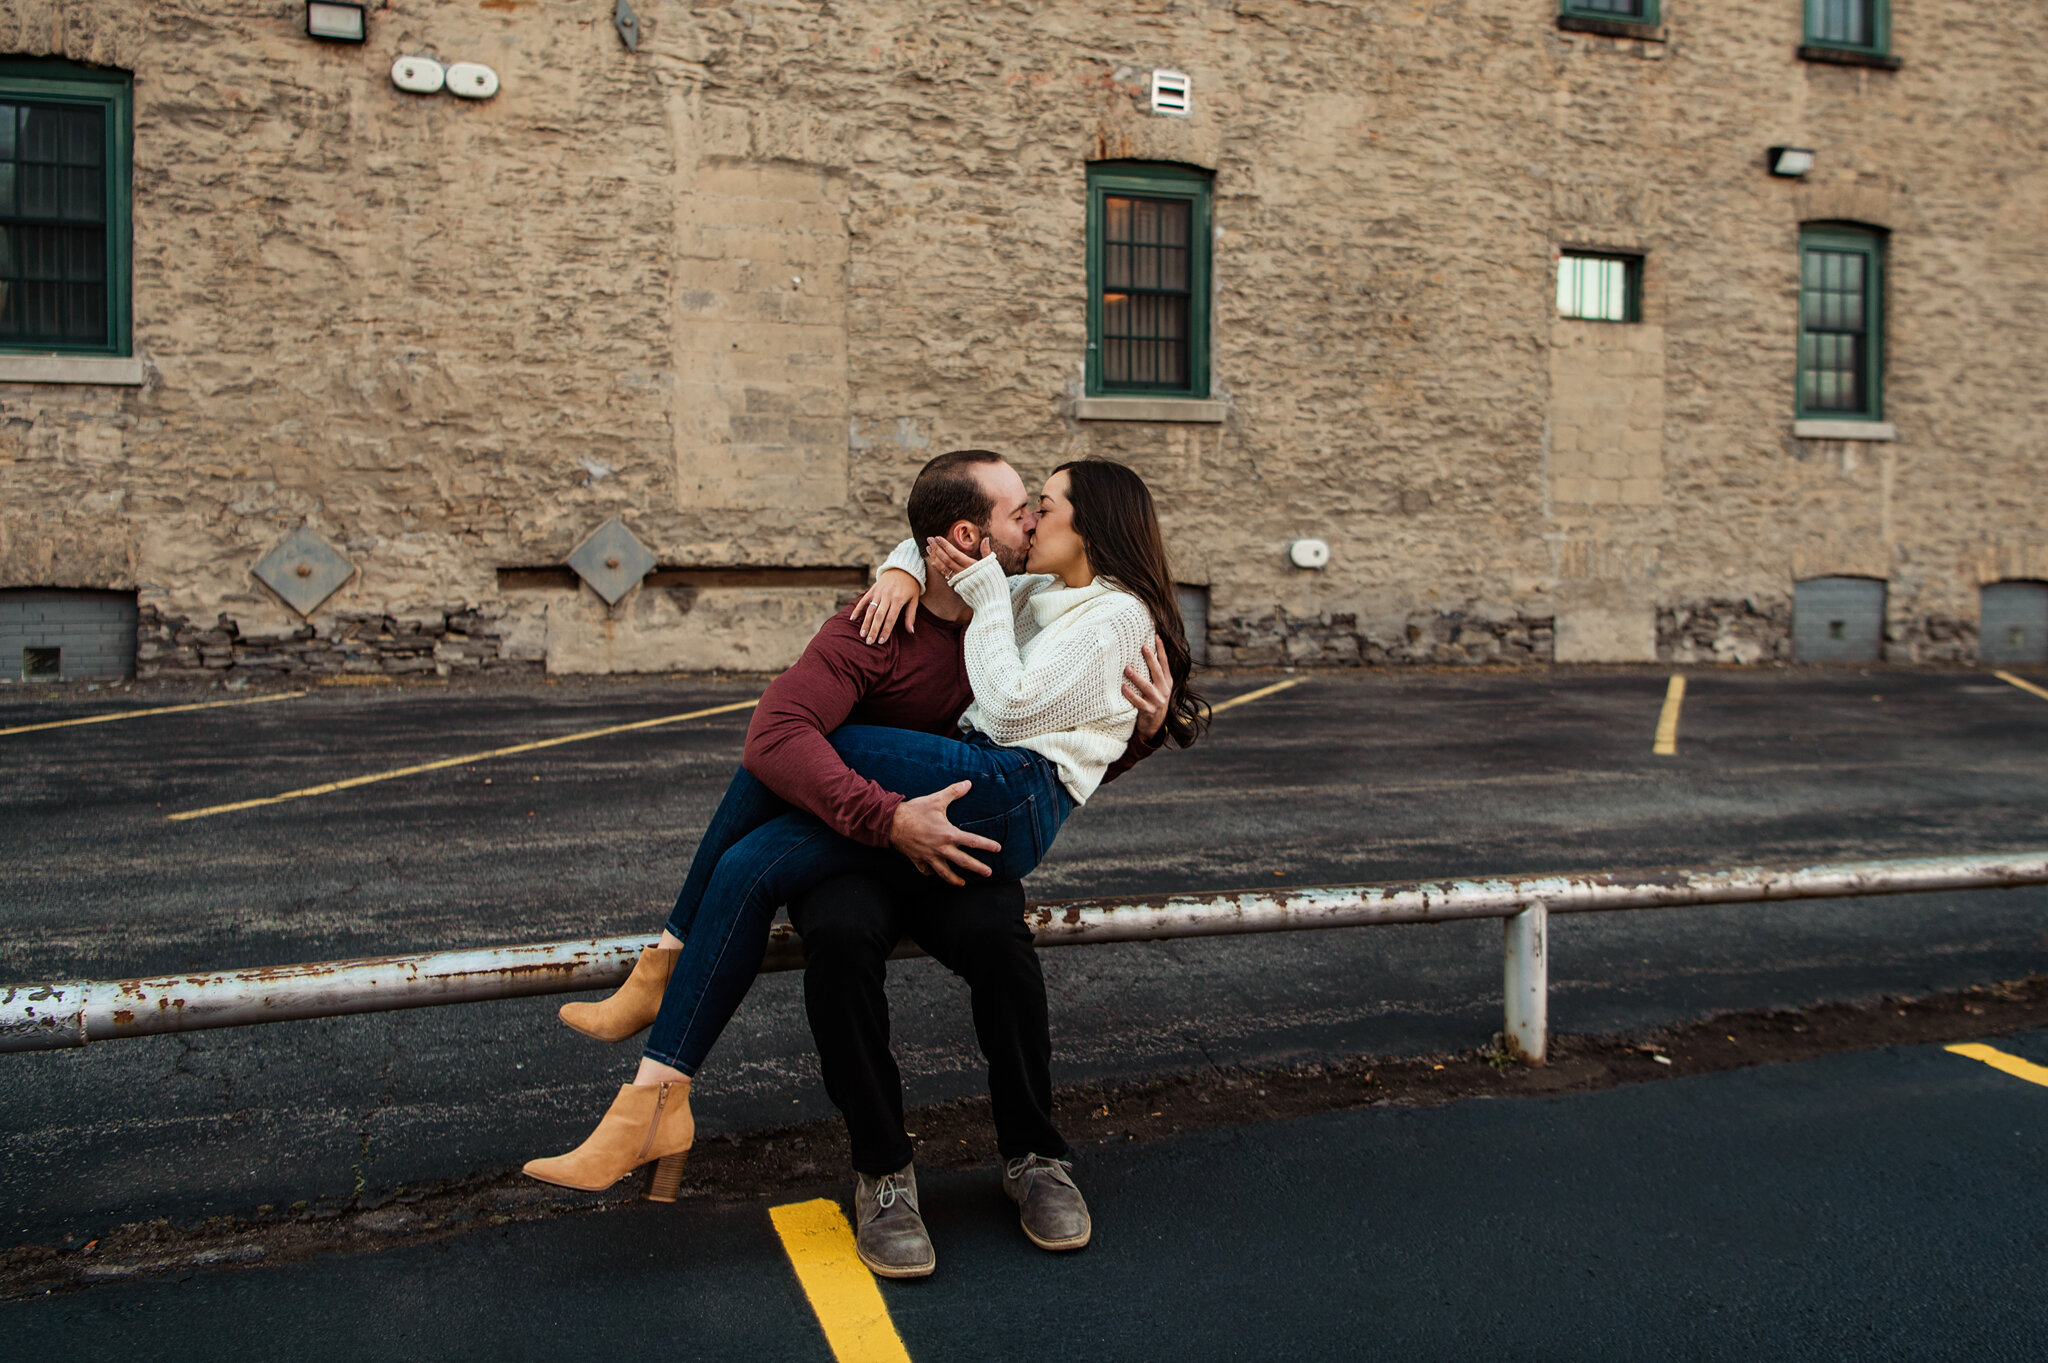 Genesee_Valley_Club_High_Falls_Rochester_Engagement_Session_JILL_STUDIO_Rochester_NY_Photographer_1445.jpg